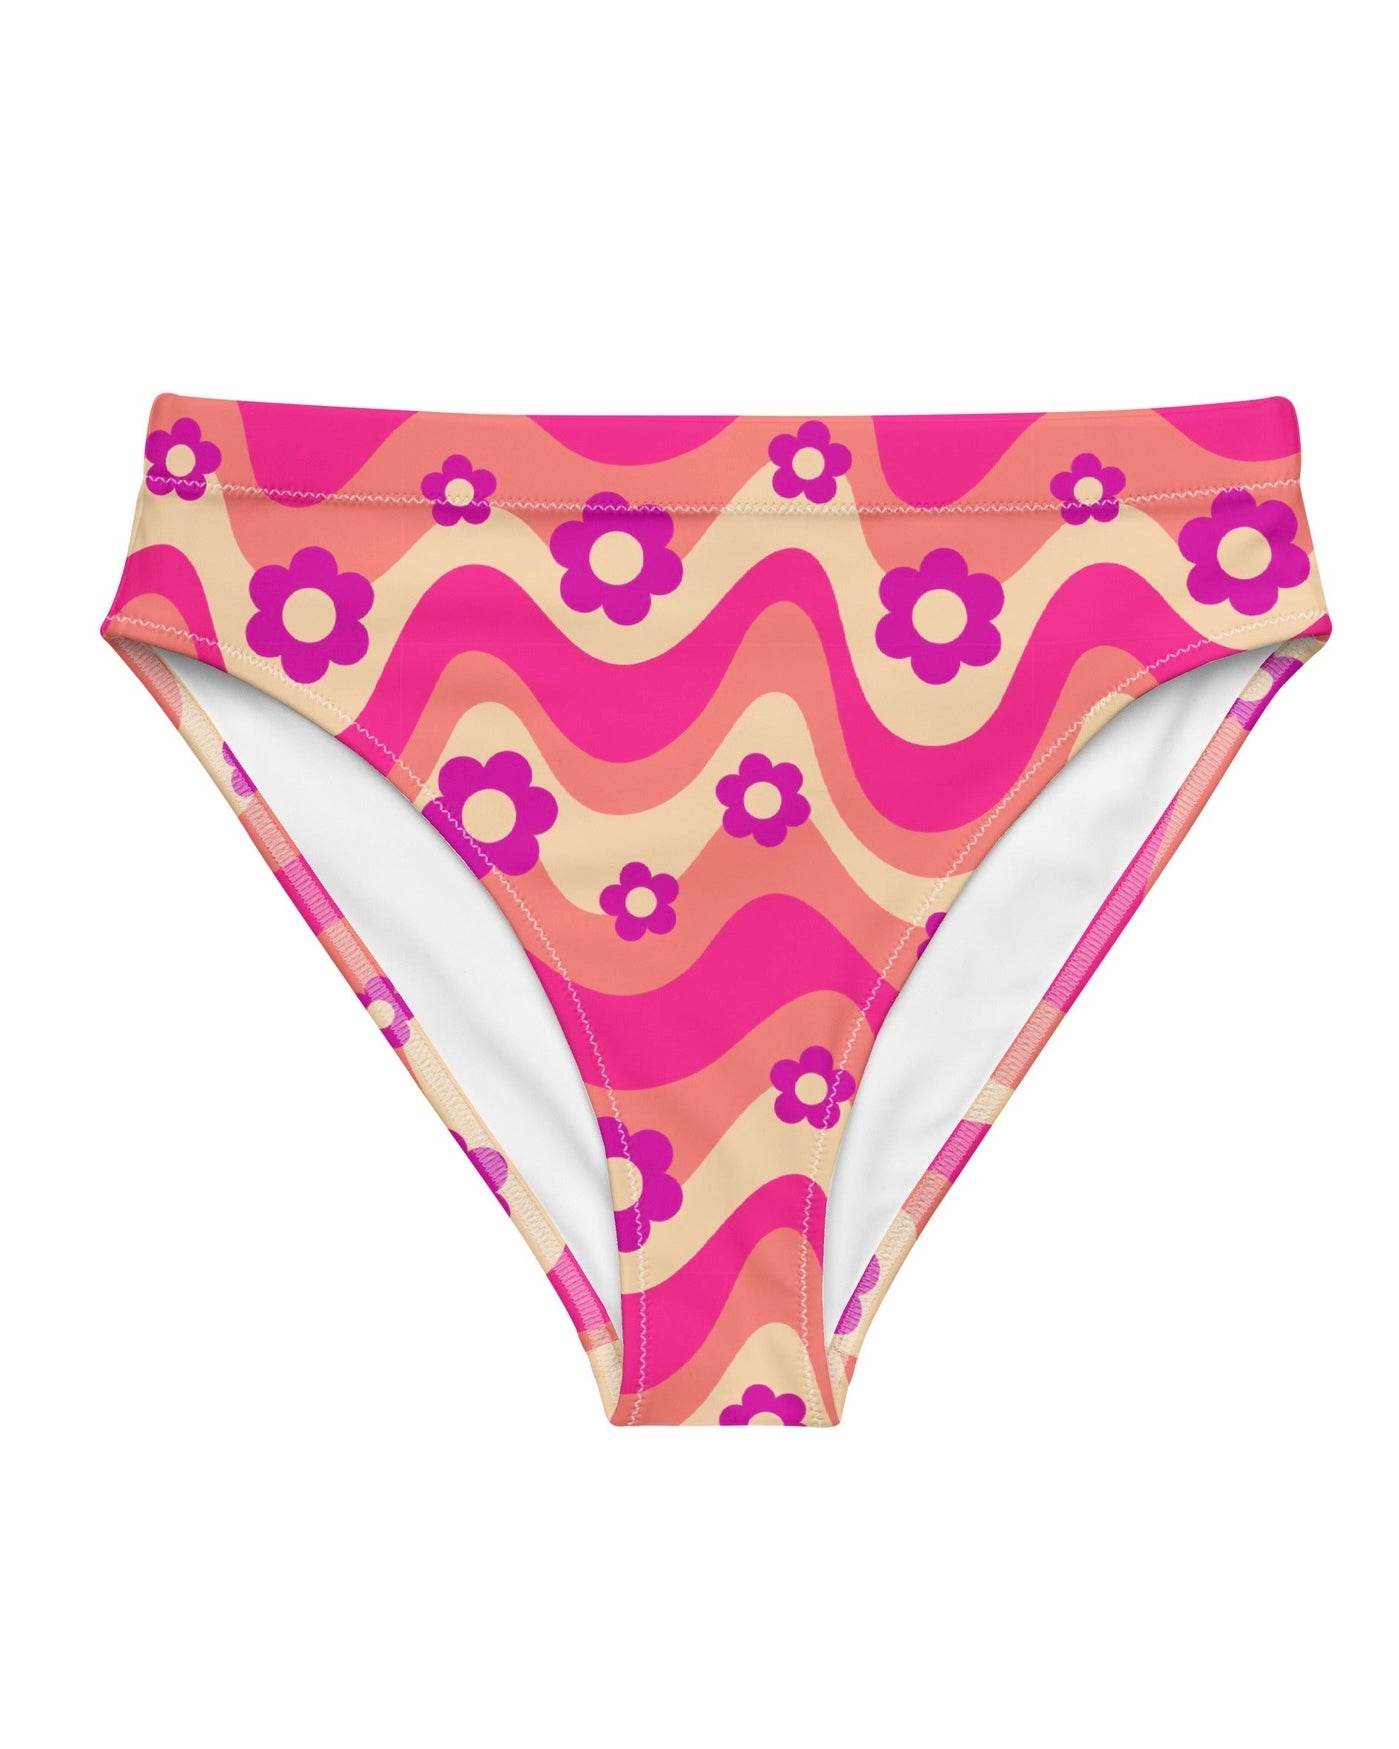 Flower Power Pink Recycled High Waisted Bottoms, High-Waisted Bottoms, - One Stop Rave